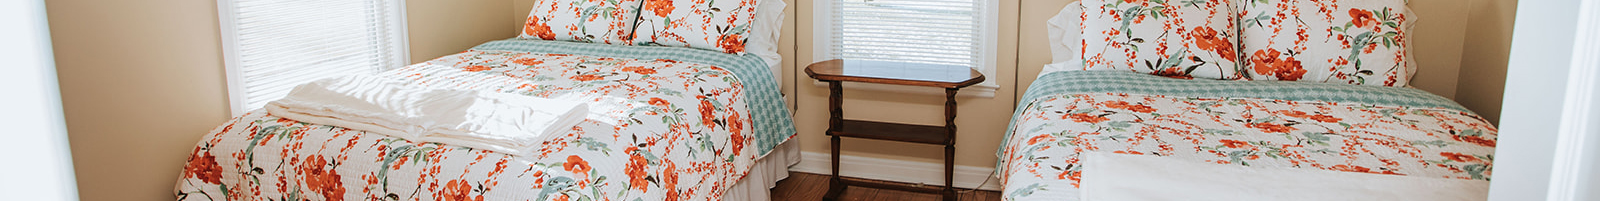 An image depicting the Blooming Meadows Bedroom, one of the bedrooms incorporated into Grandma's House at Circle K Farm